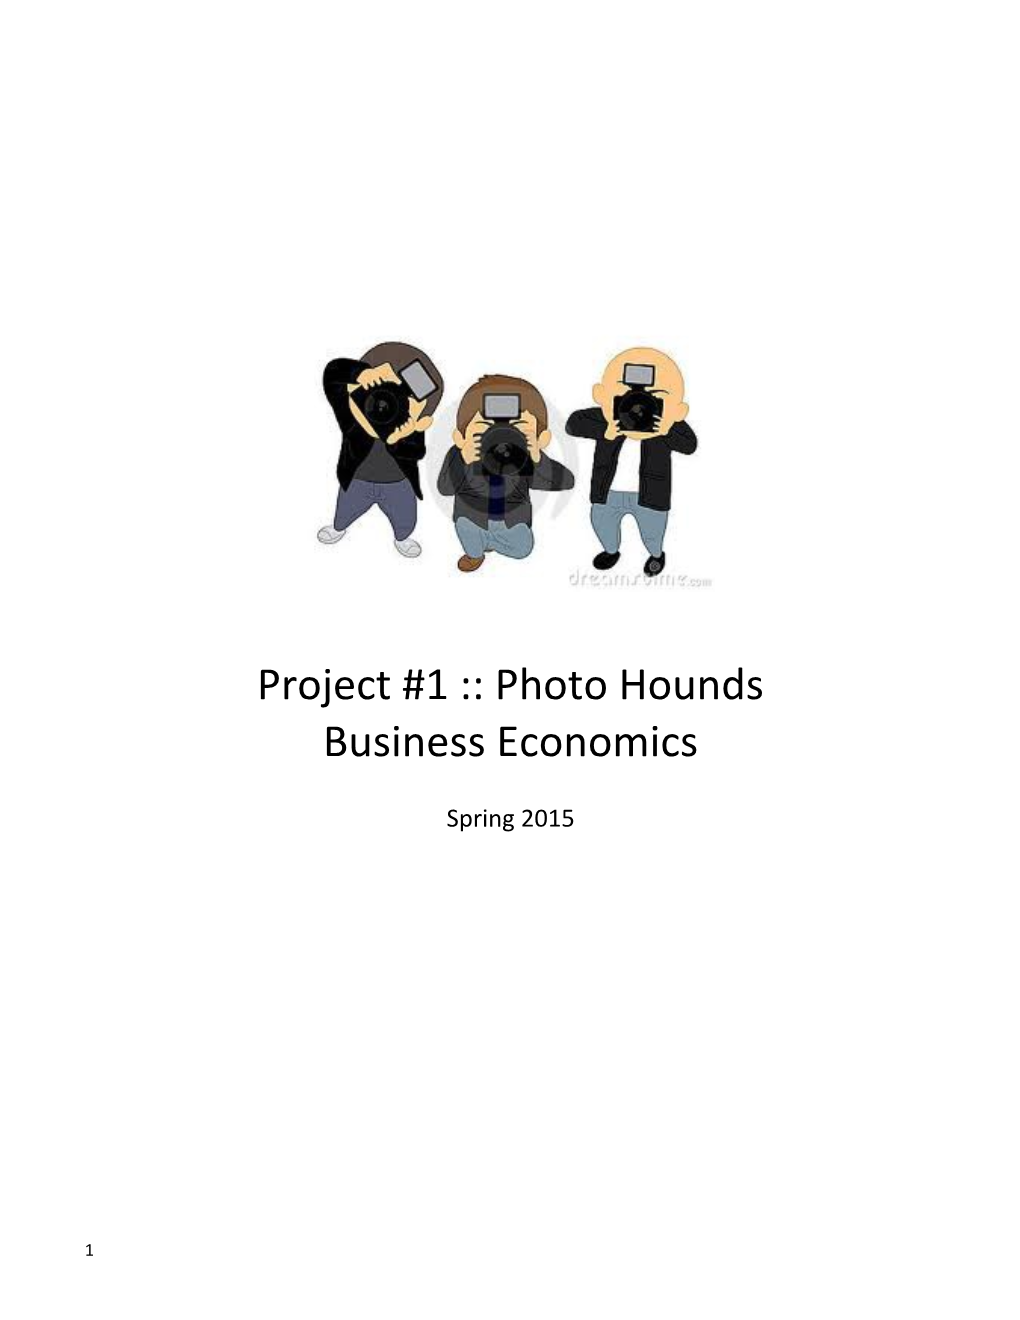 Project #1 Photo Hounds